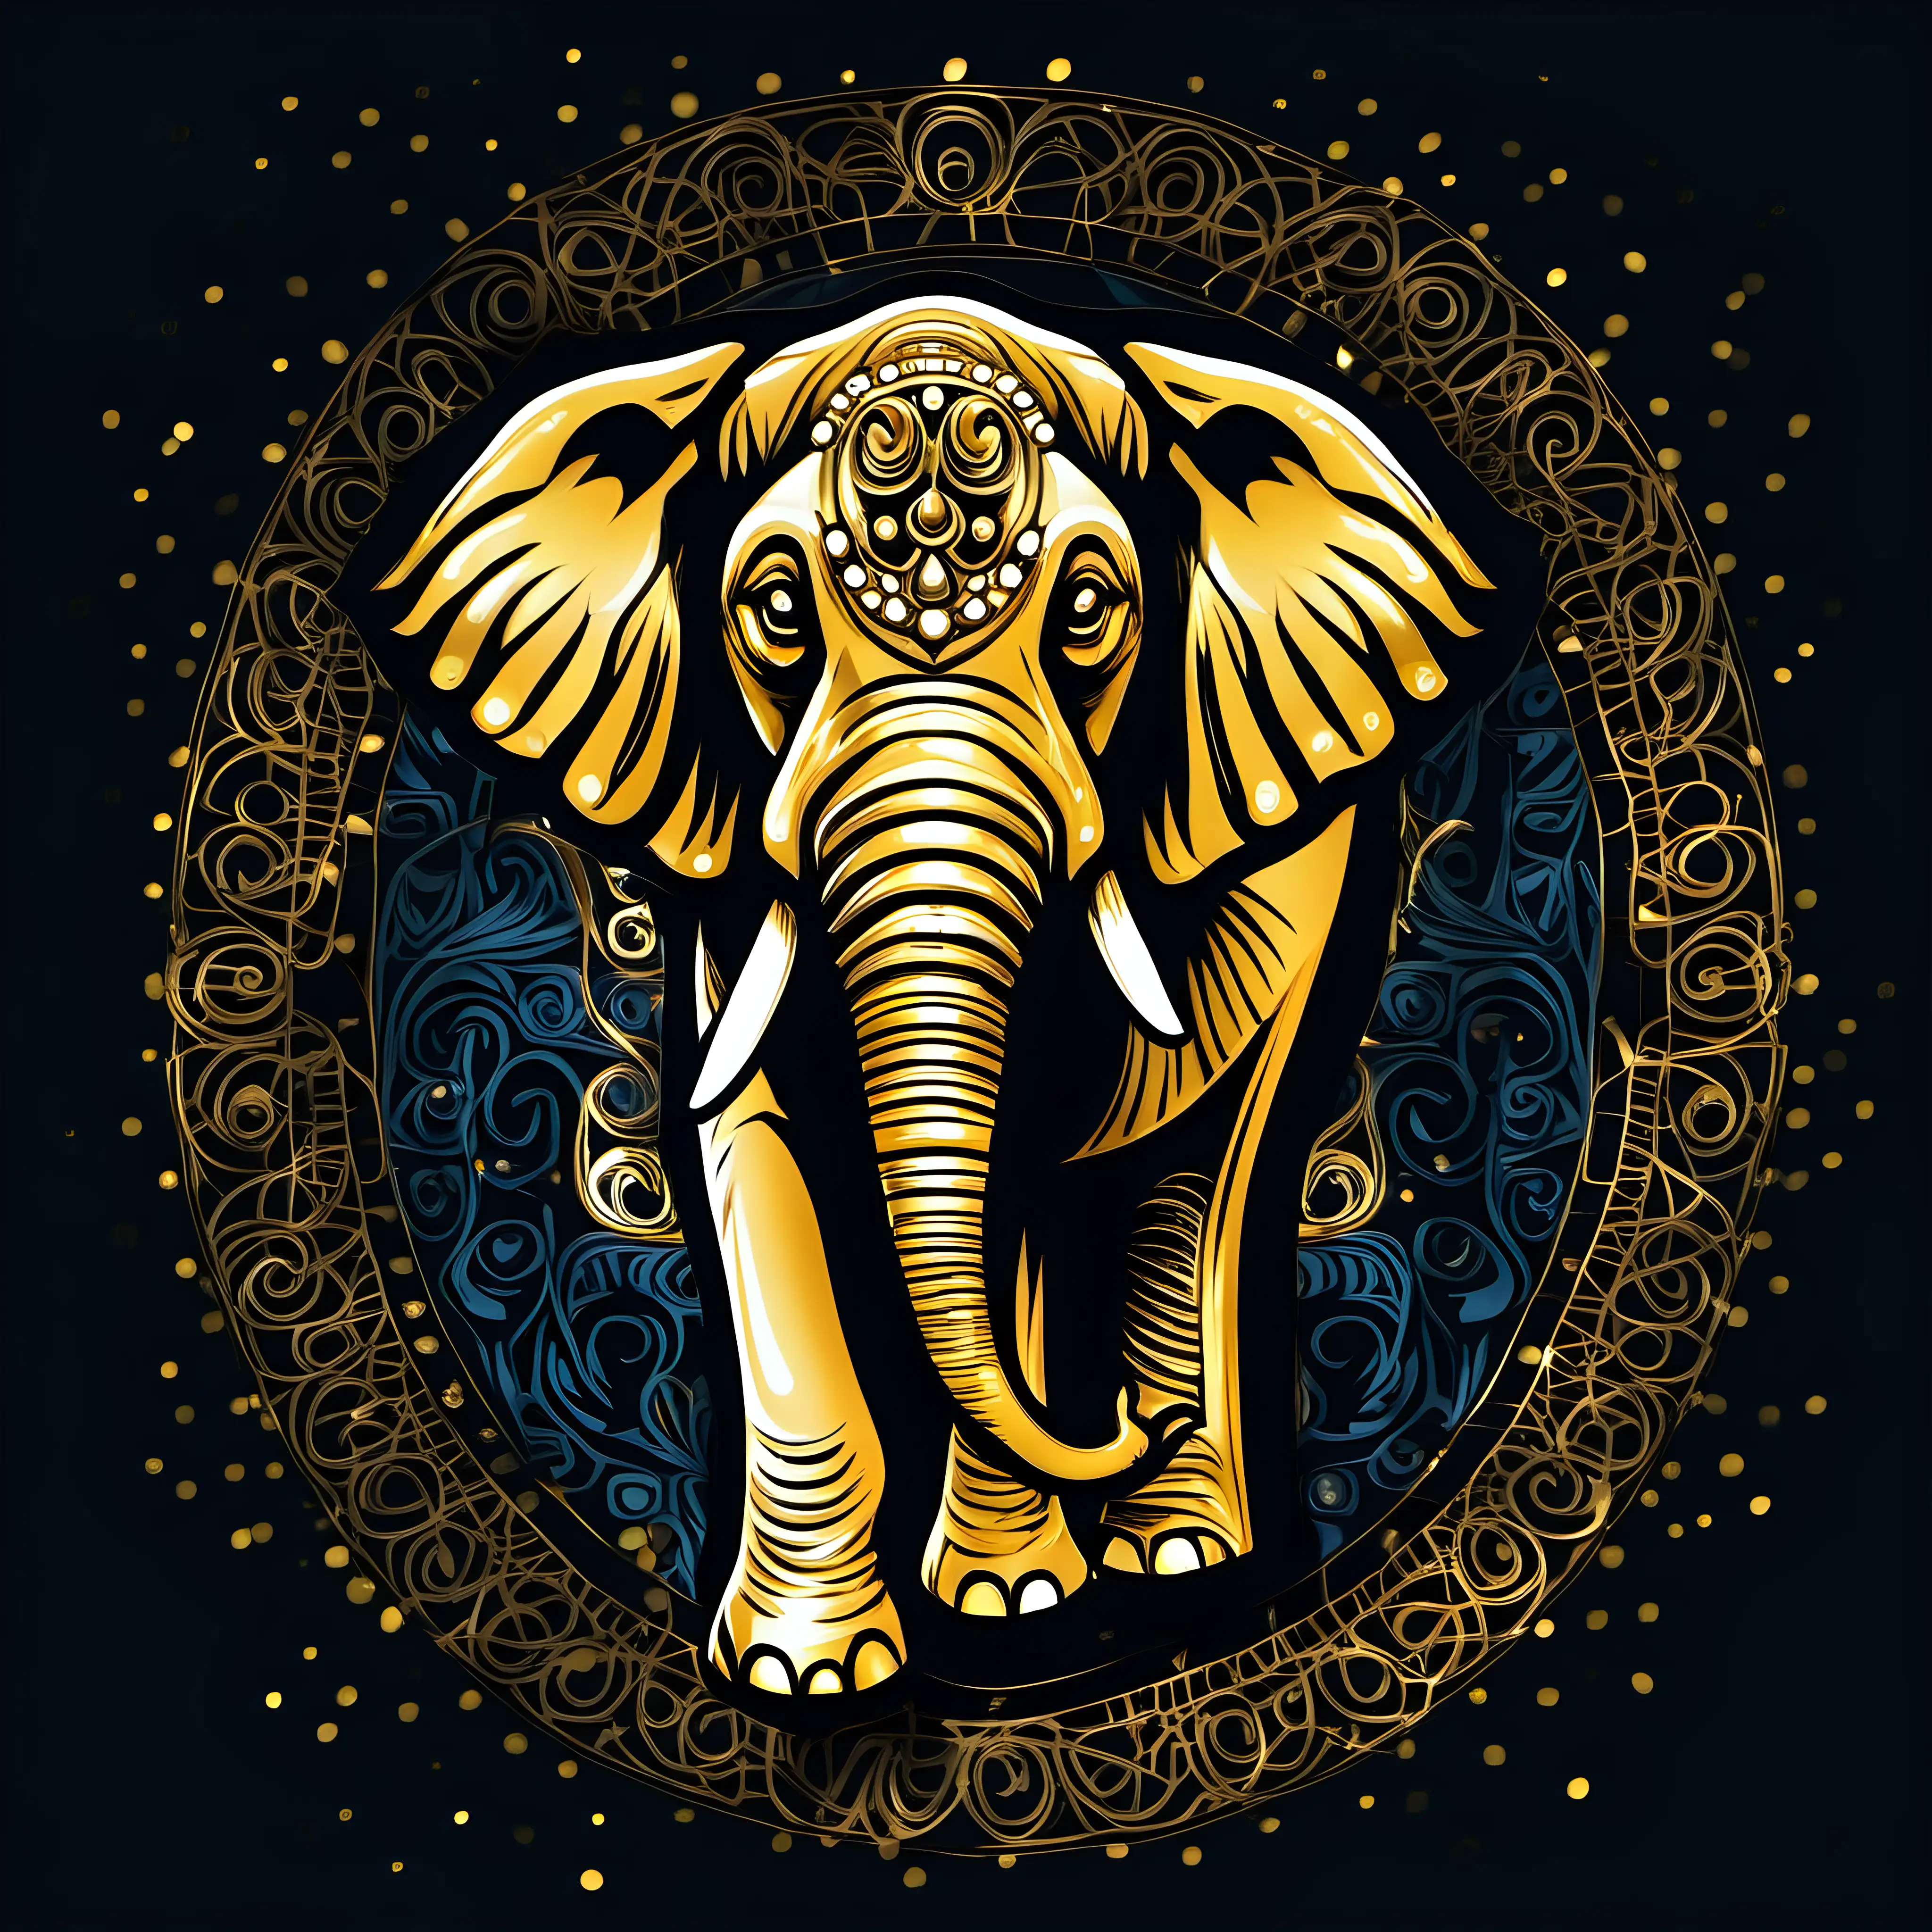 Gold Elephant Design with Light Blue Accents on Black TShirt